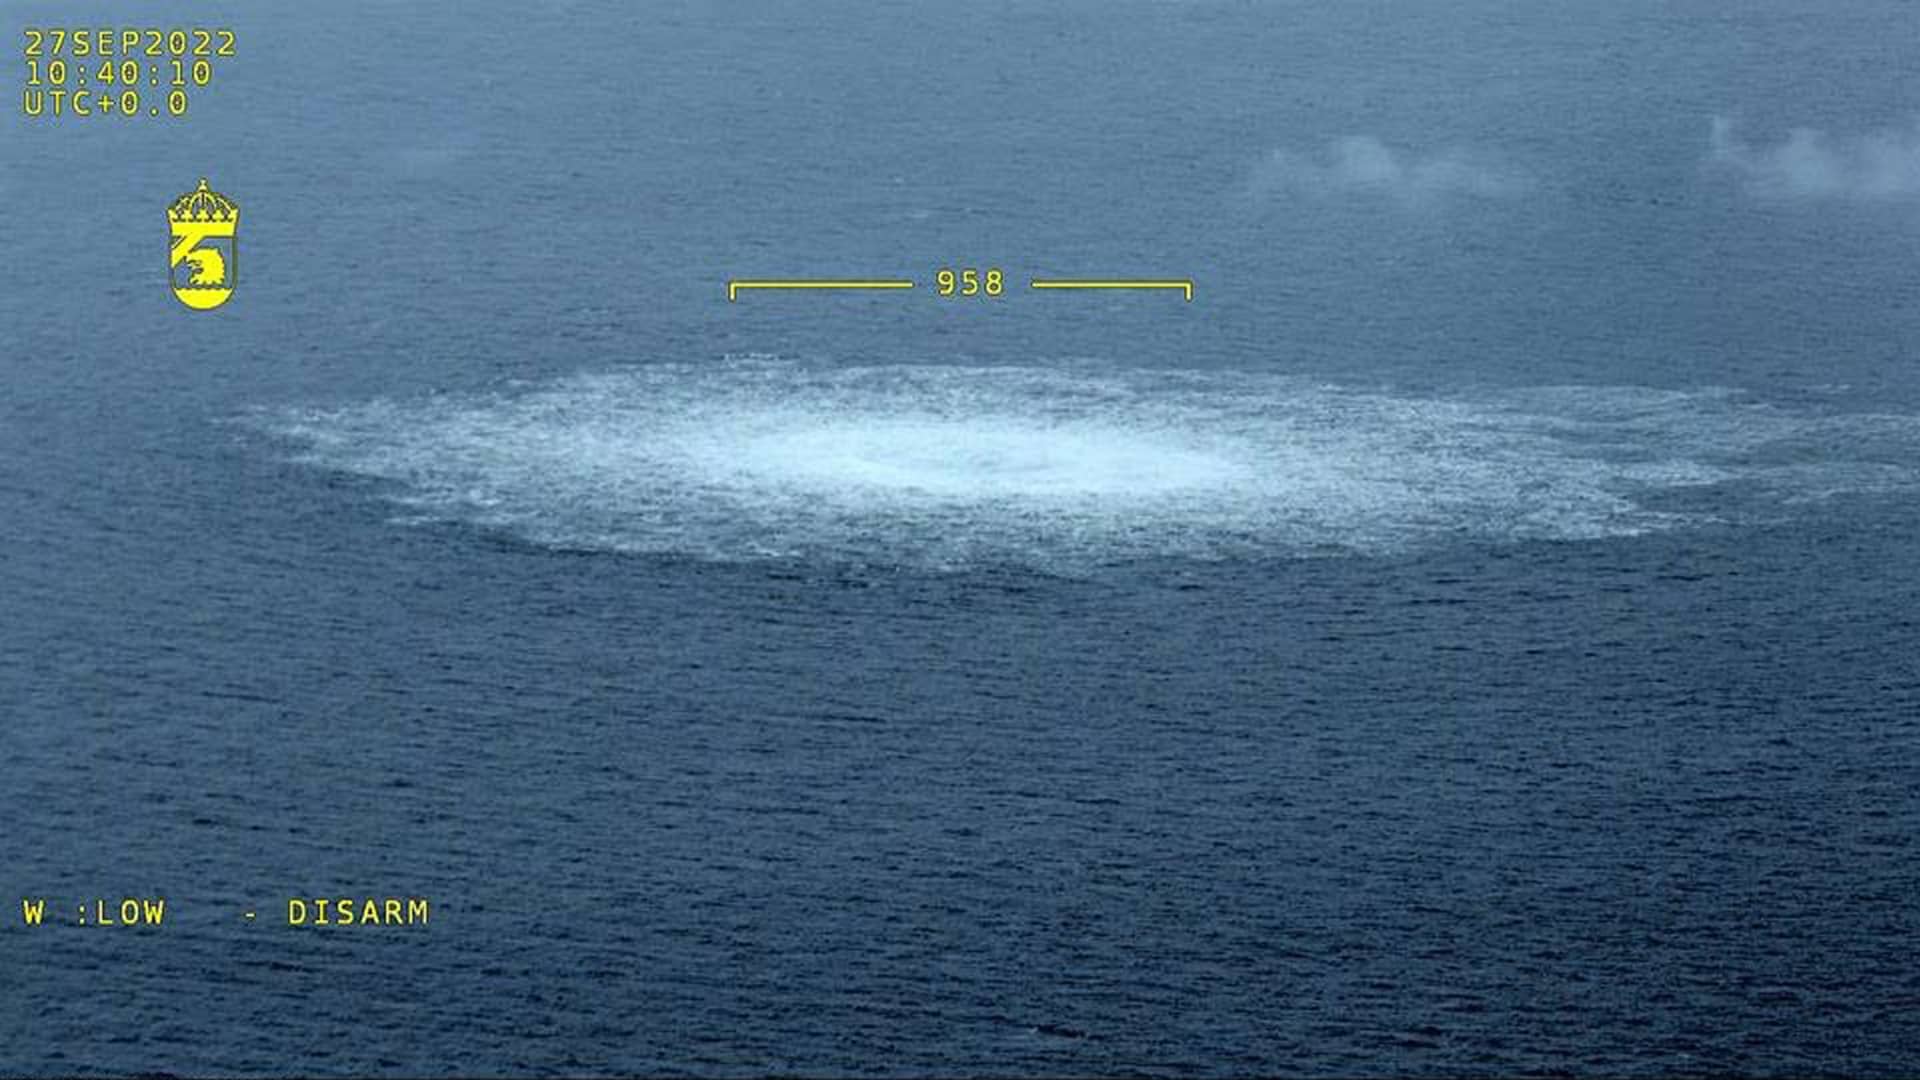 Gas emanating from a leak on the Nord Stream 2 gas pipeline in the Baltic Sea on Sept. 27, 2022.